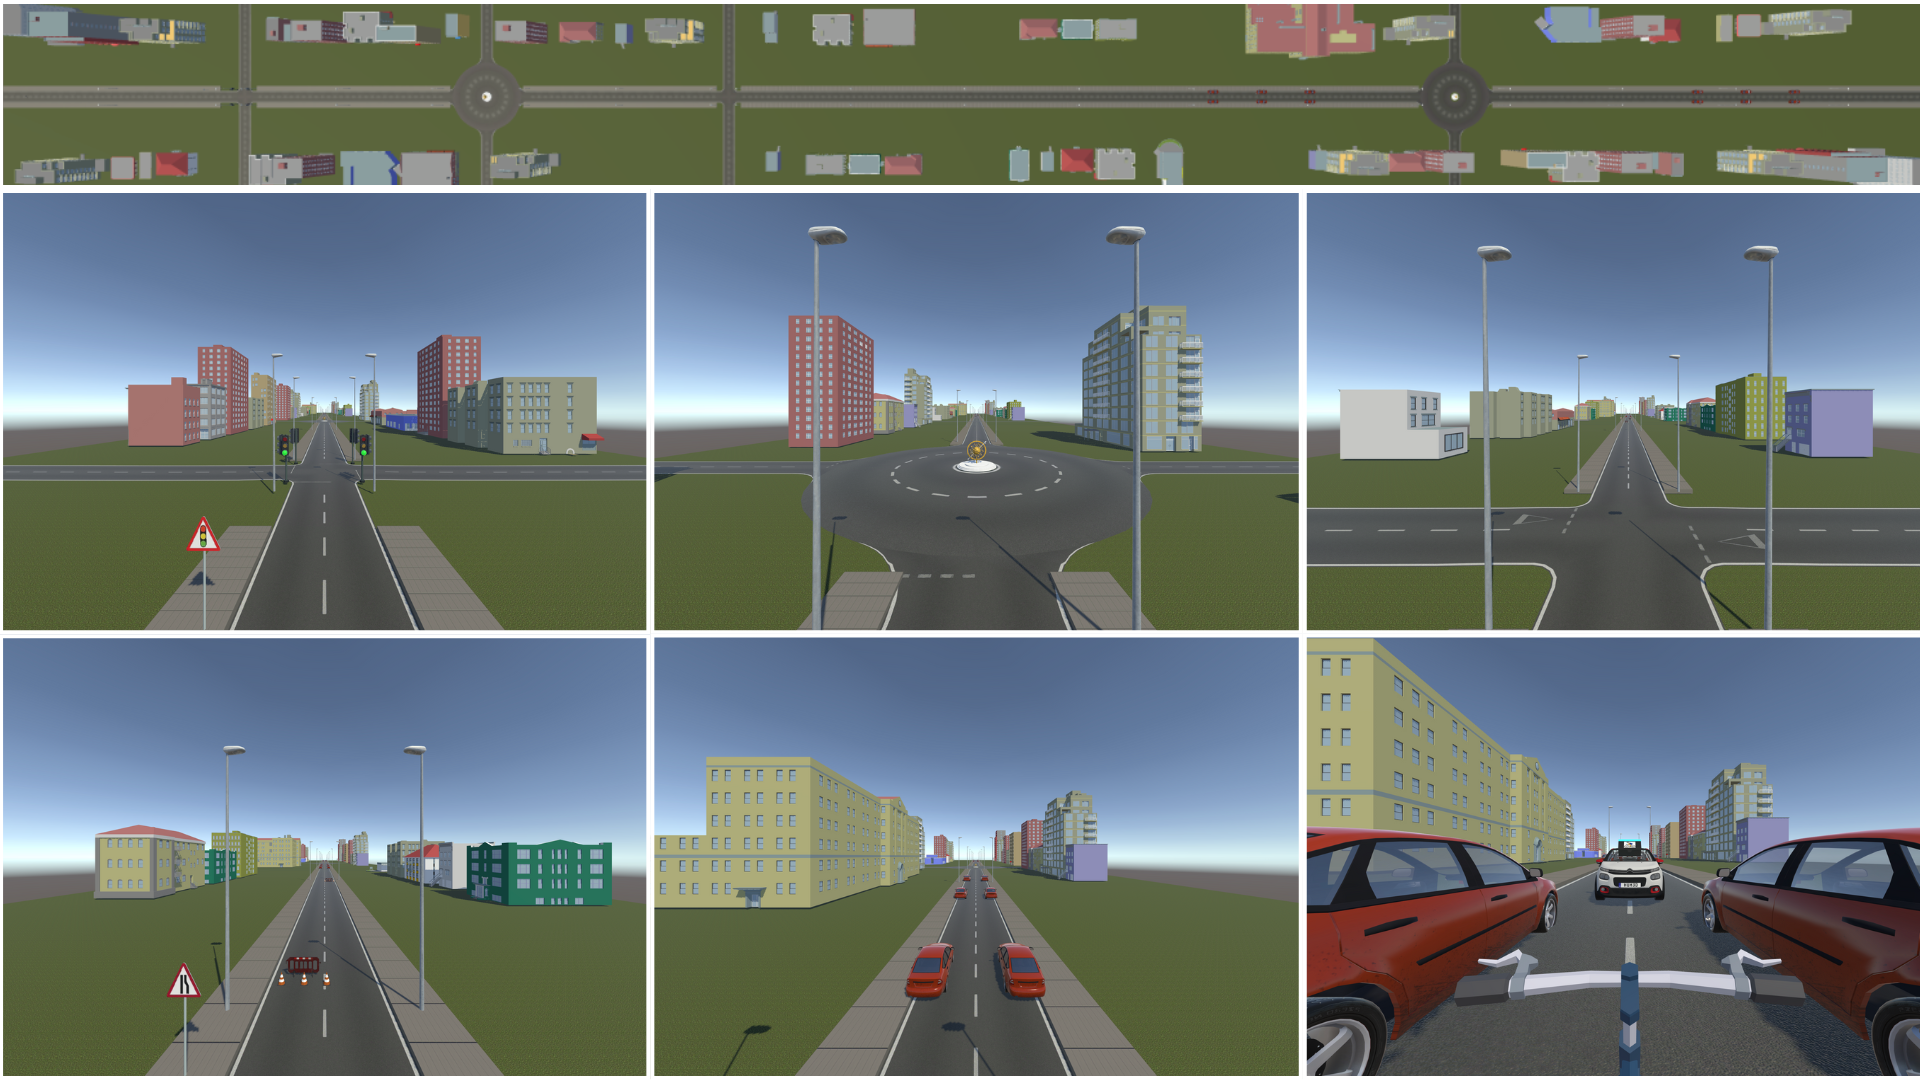 Views of the VR road environments used in the eHMI study